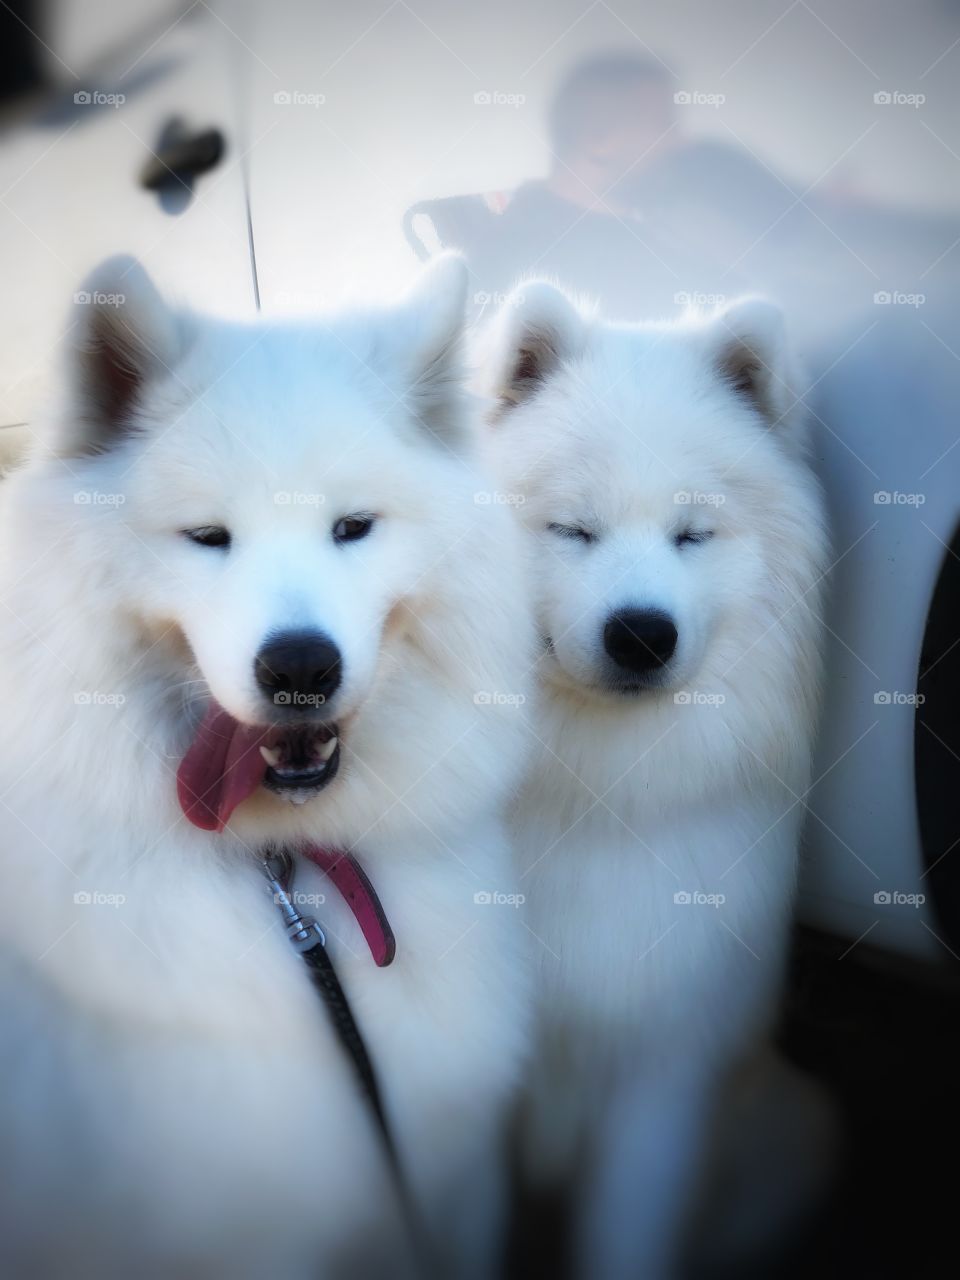 What can be better than one happy samoyed? Exactly! Couple happy samoyeds! white, fluffy, energetic are always open for hugs